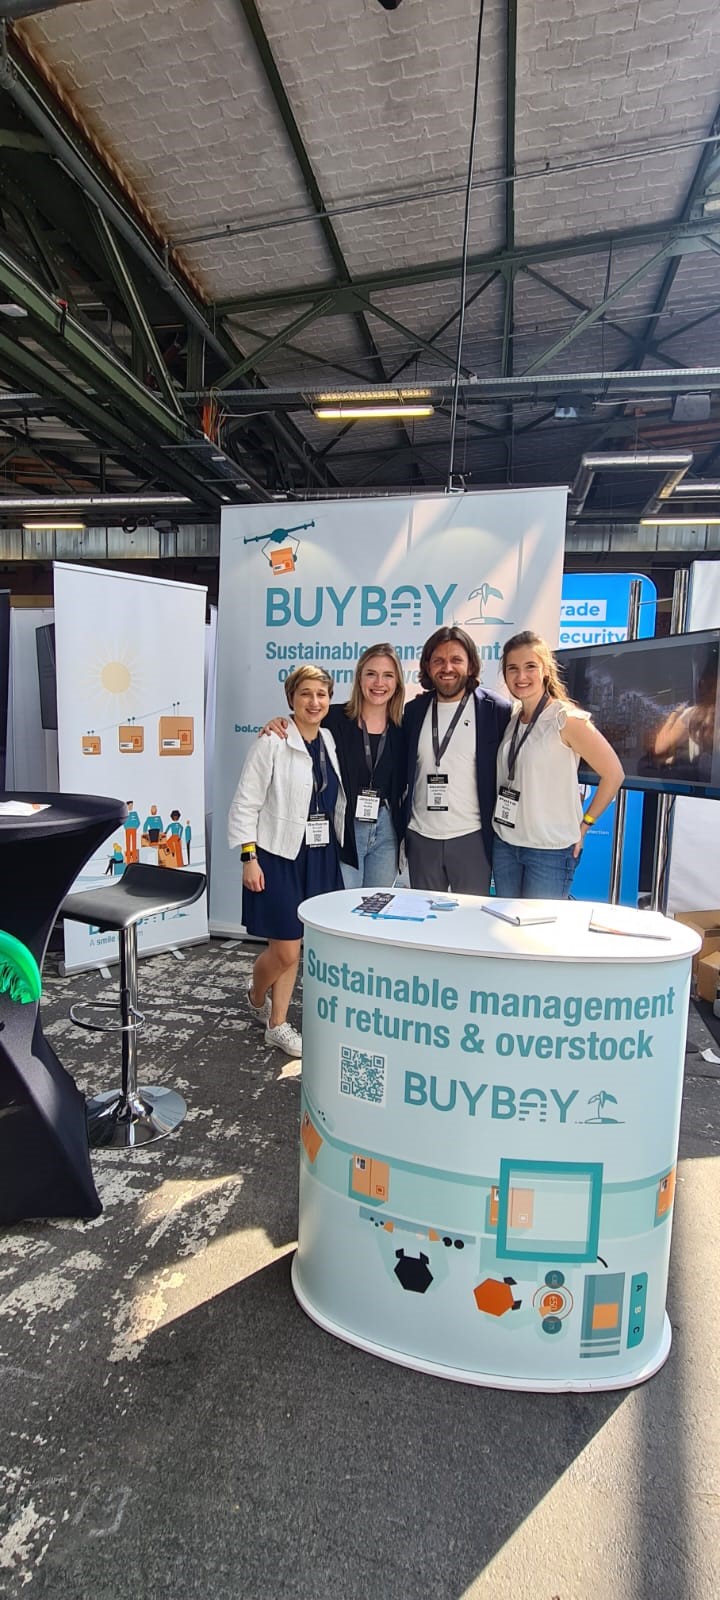 Team BuyBay at the E-Commerce EXPO Berlin